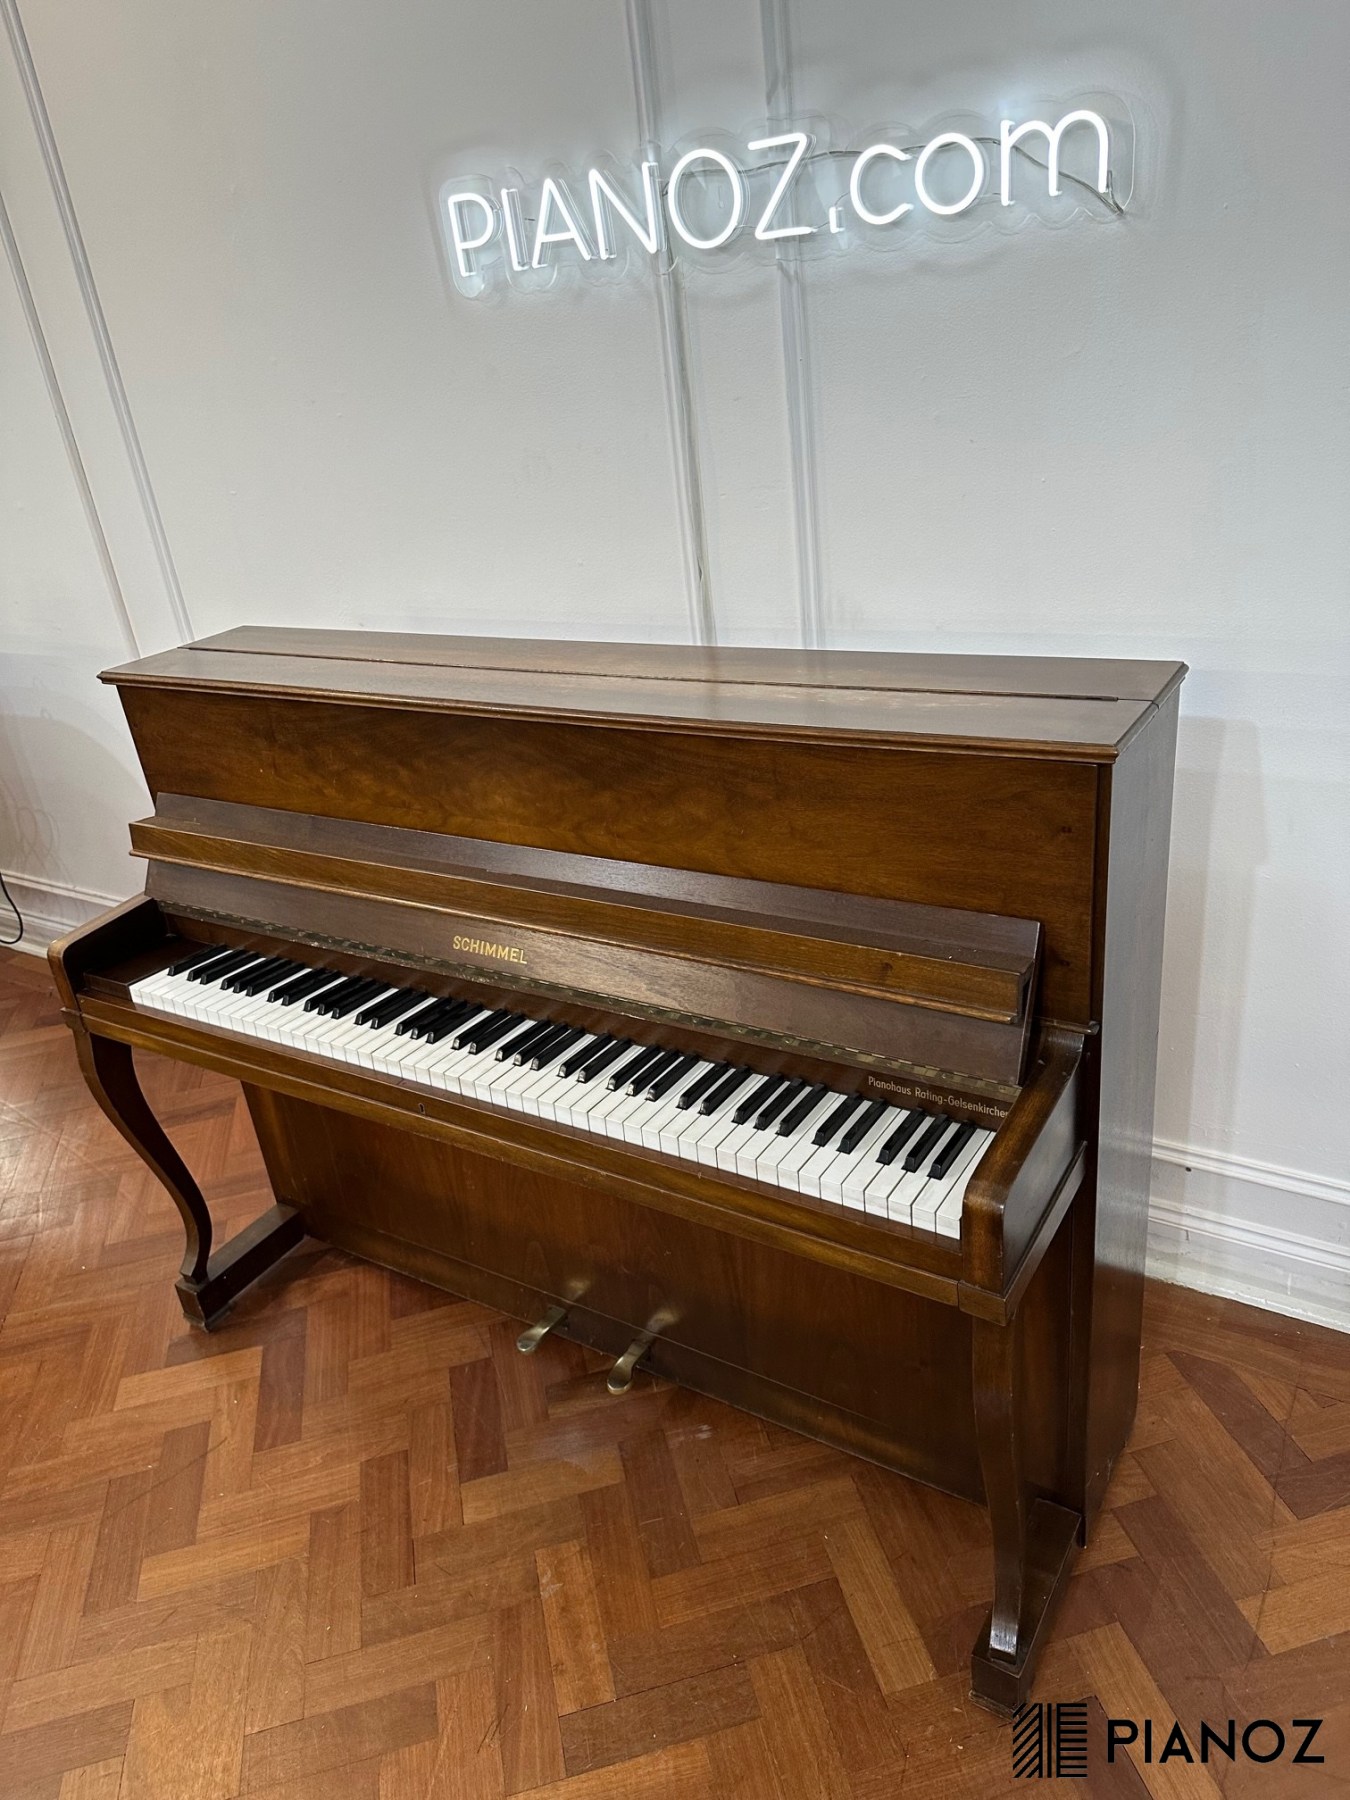 Schimmel German Upright Piano piano for sale in UK